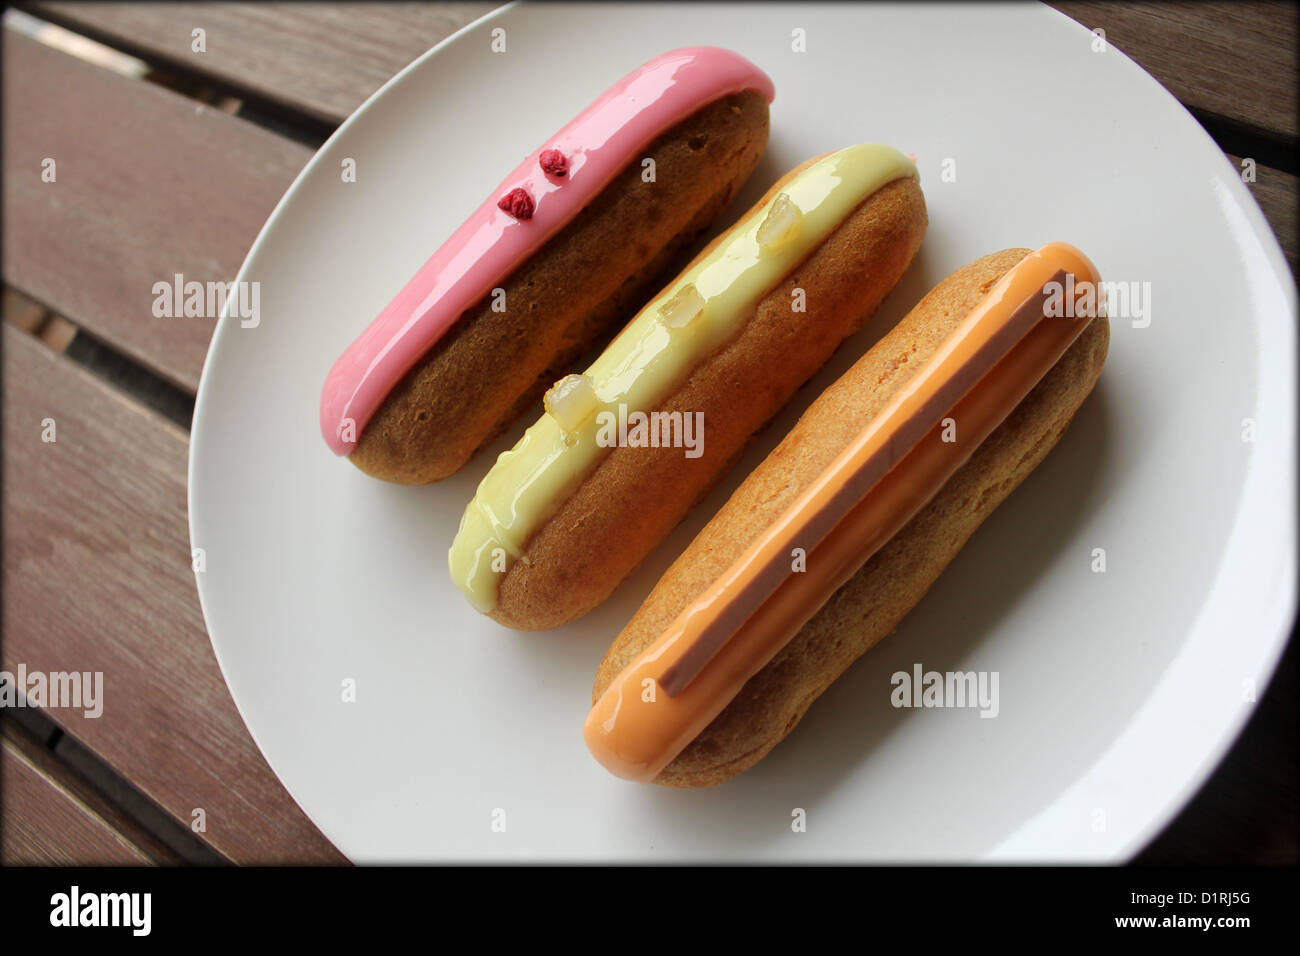 3 fruit eclairs on a white plate Stock Photo